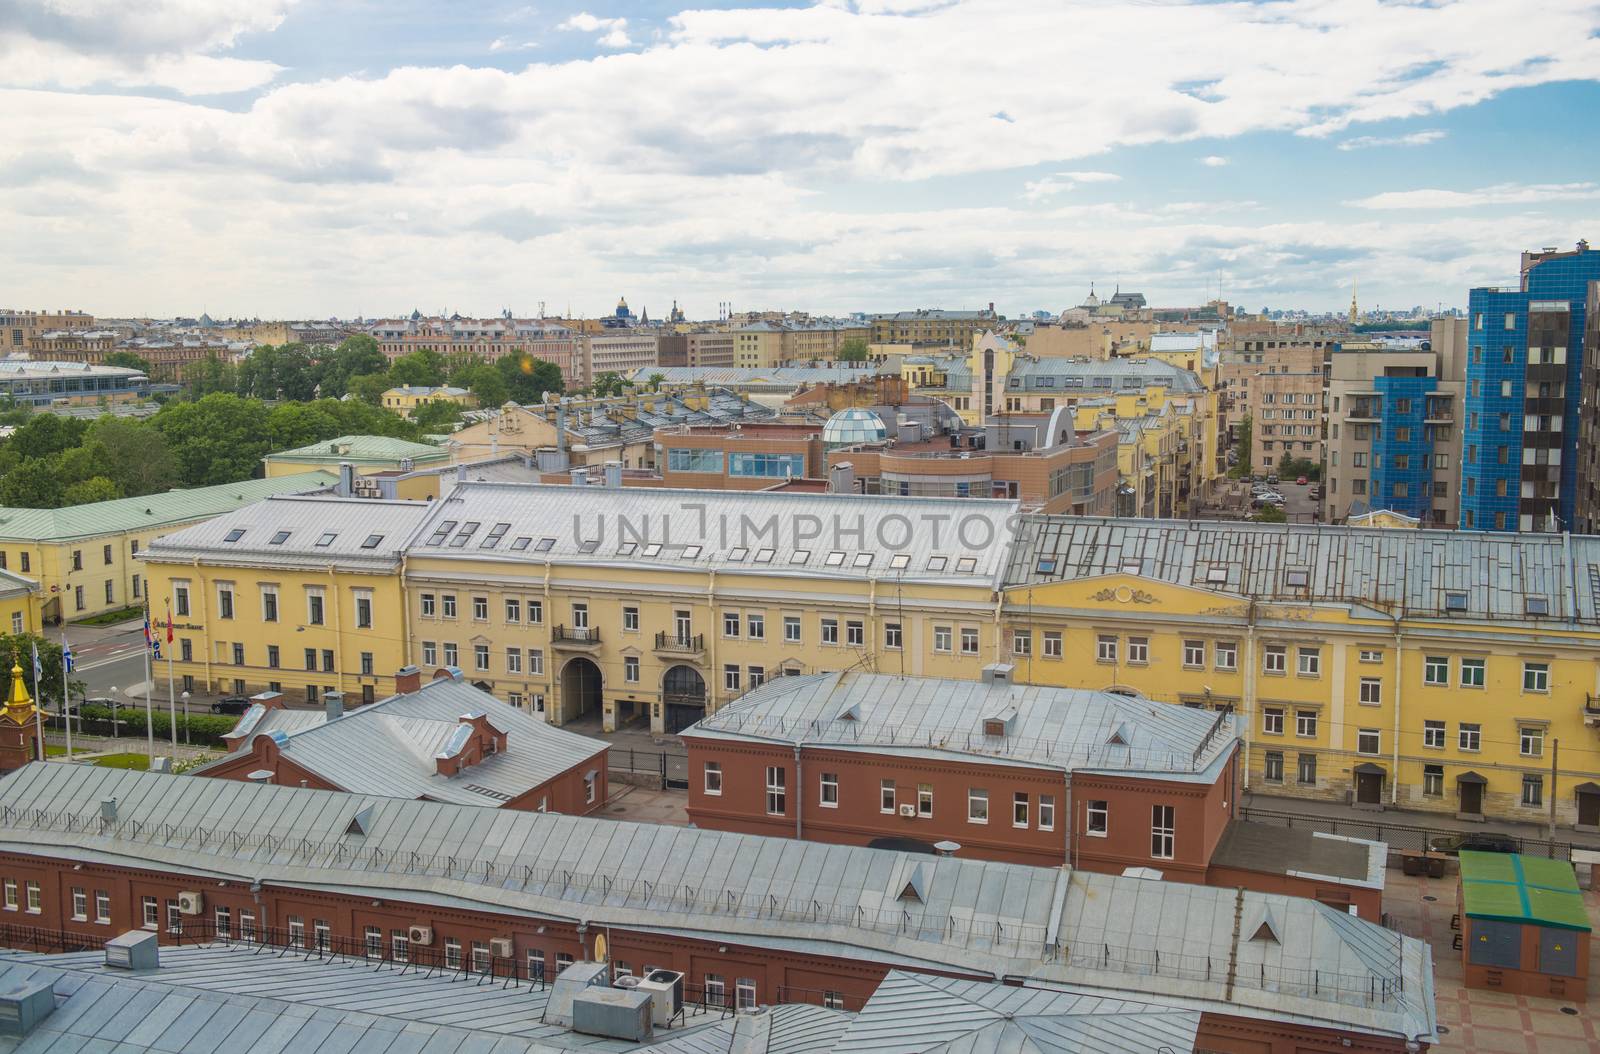 The view of the roofs of Sankt Petersburg, Russia